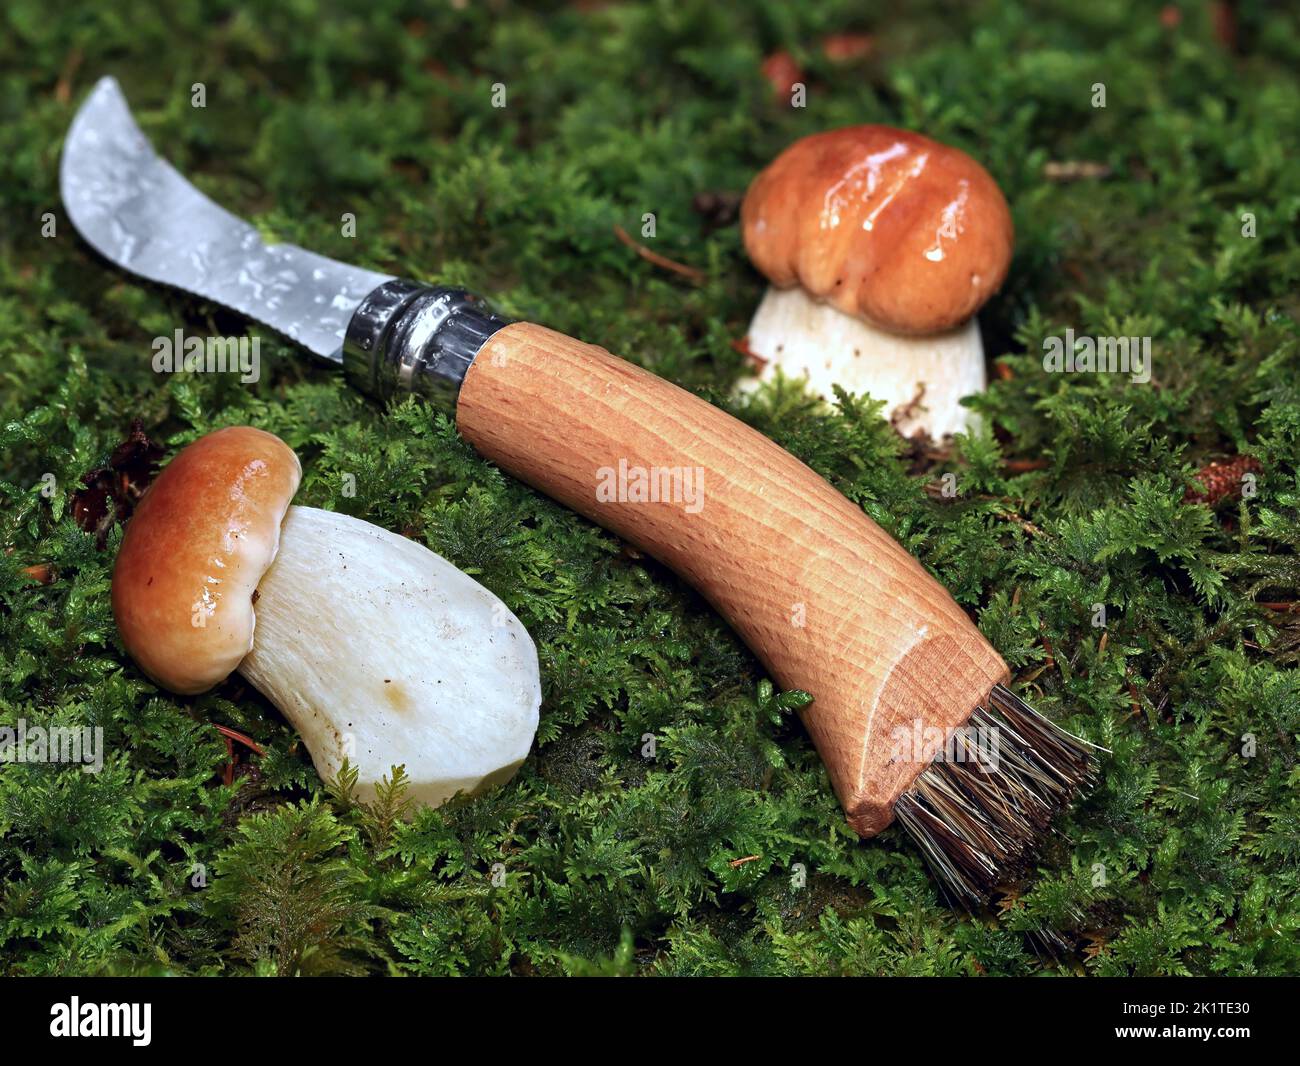 young mushroom, Boletus edulis, in the moss with a mushroom knife Stock Photo